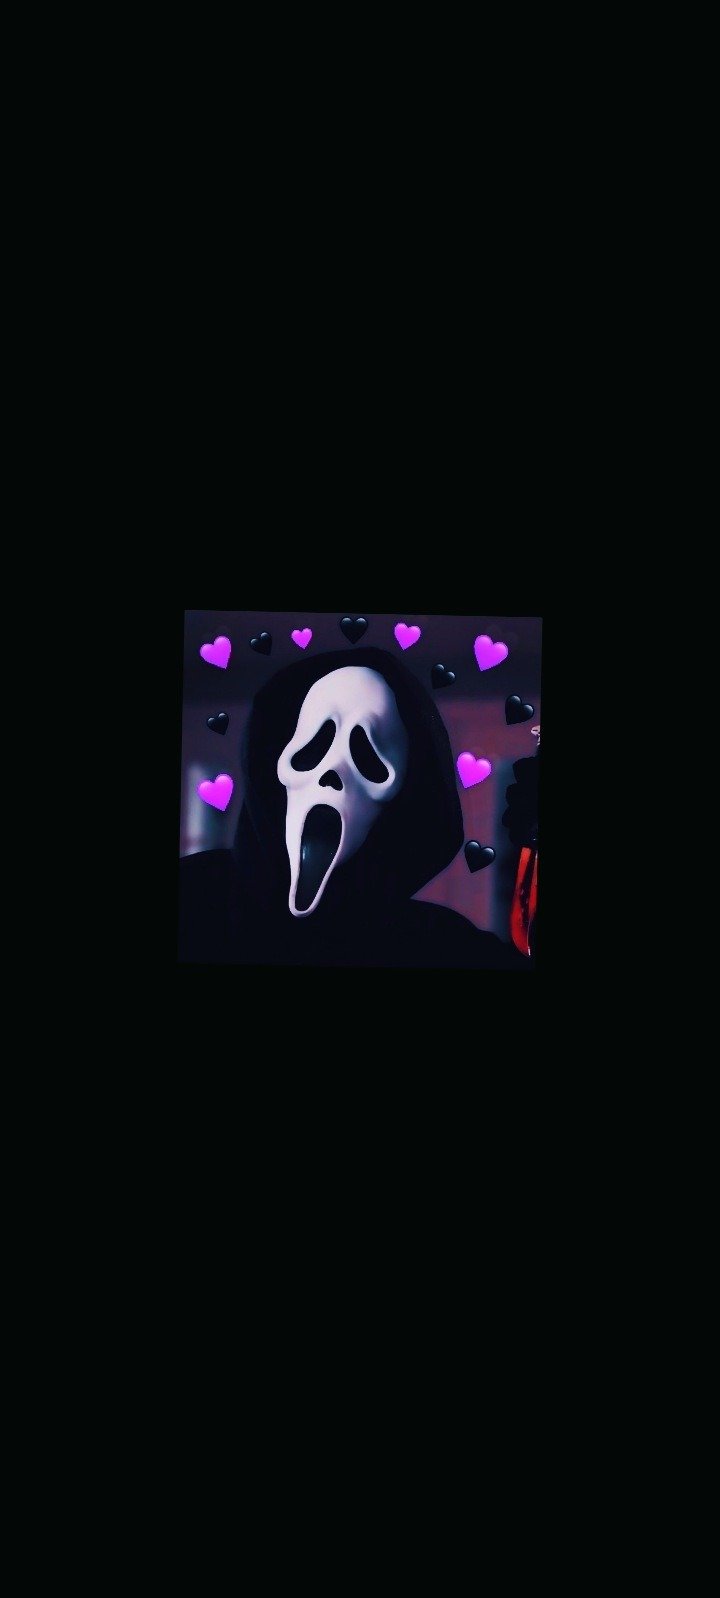 Ghostface Wallpaper  KoLPaPer  Awesome Free HD Wallpapers  Ghost faces  Ghostface Scary movie characters